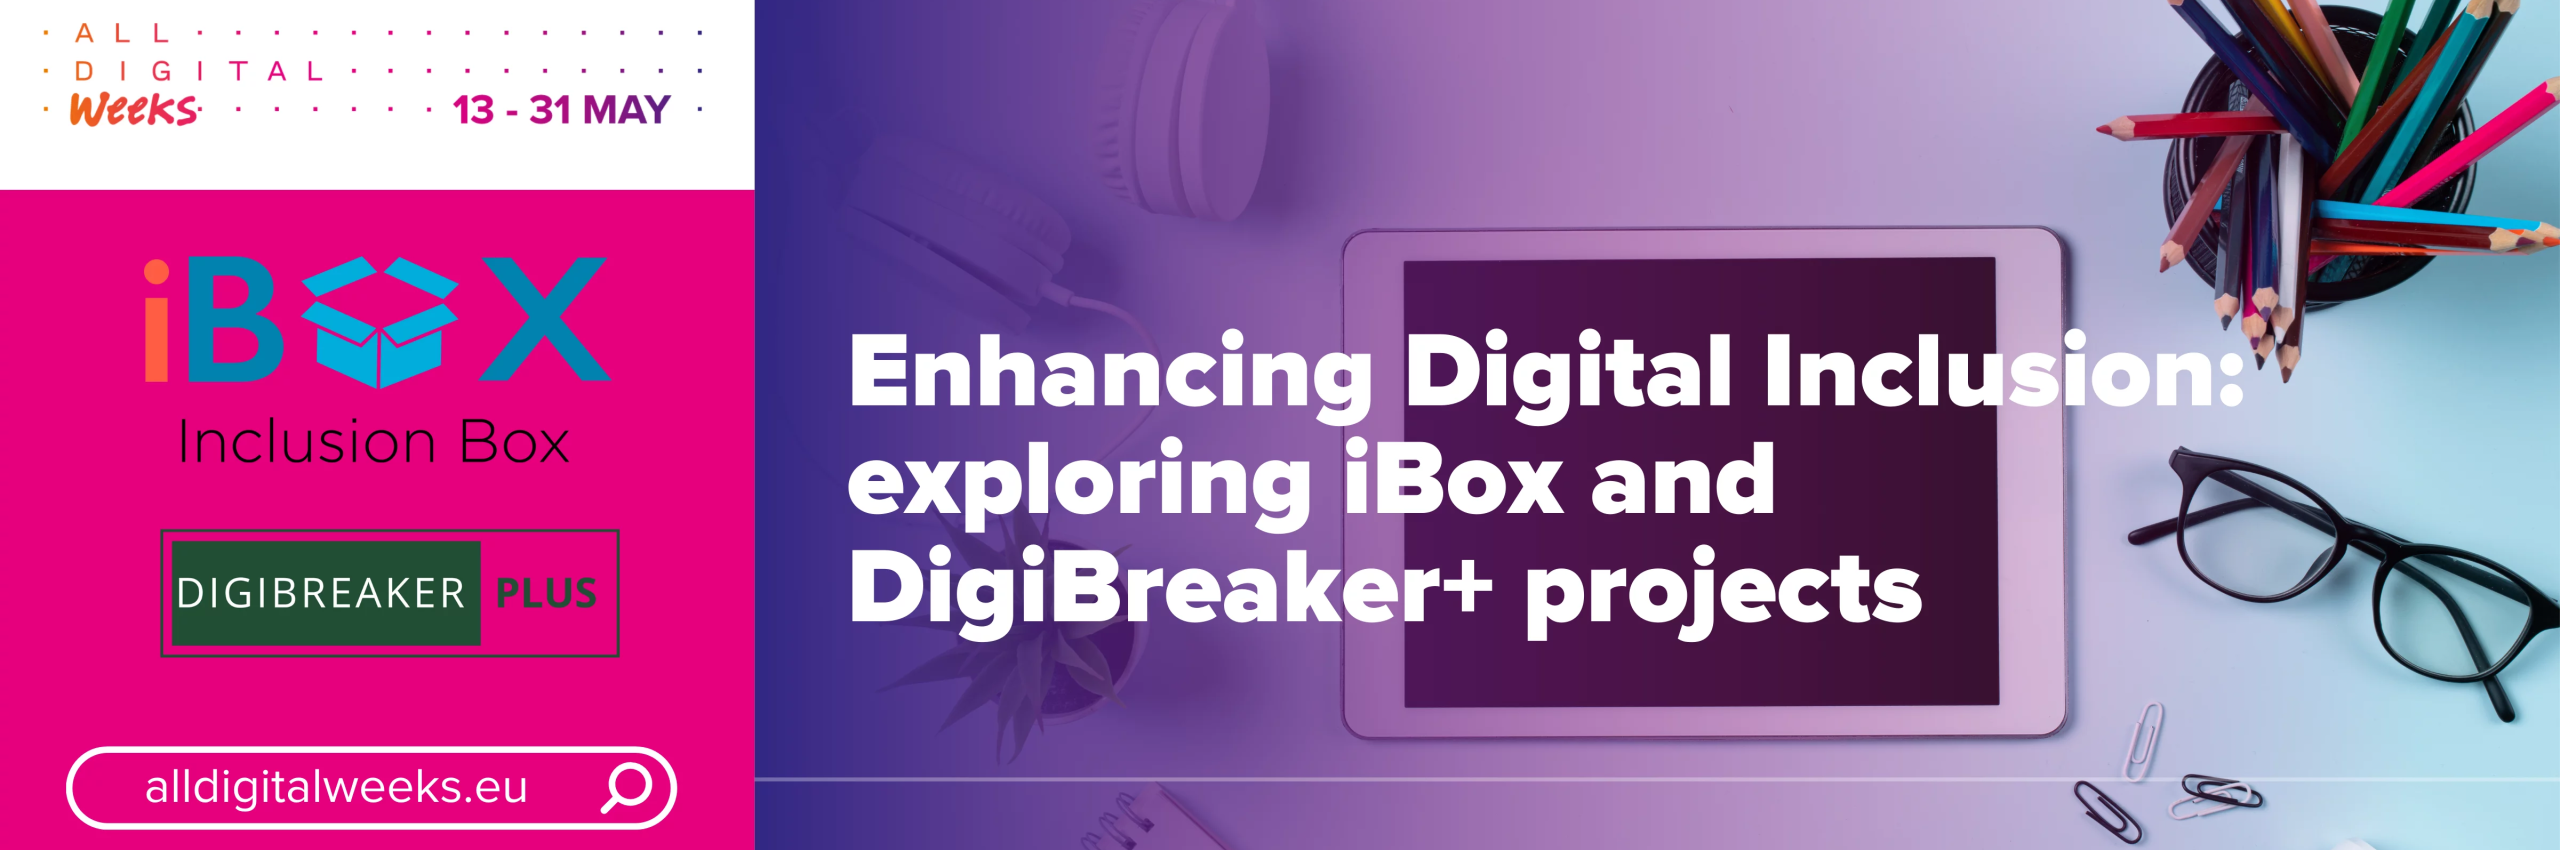 Enhancing Digital Inclusion: exploring iBox and DigiBreaker+ projects